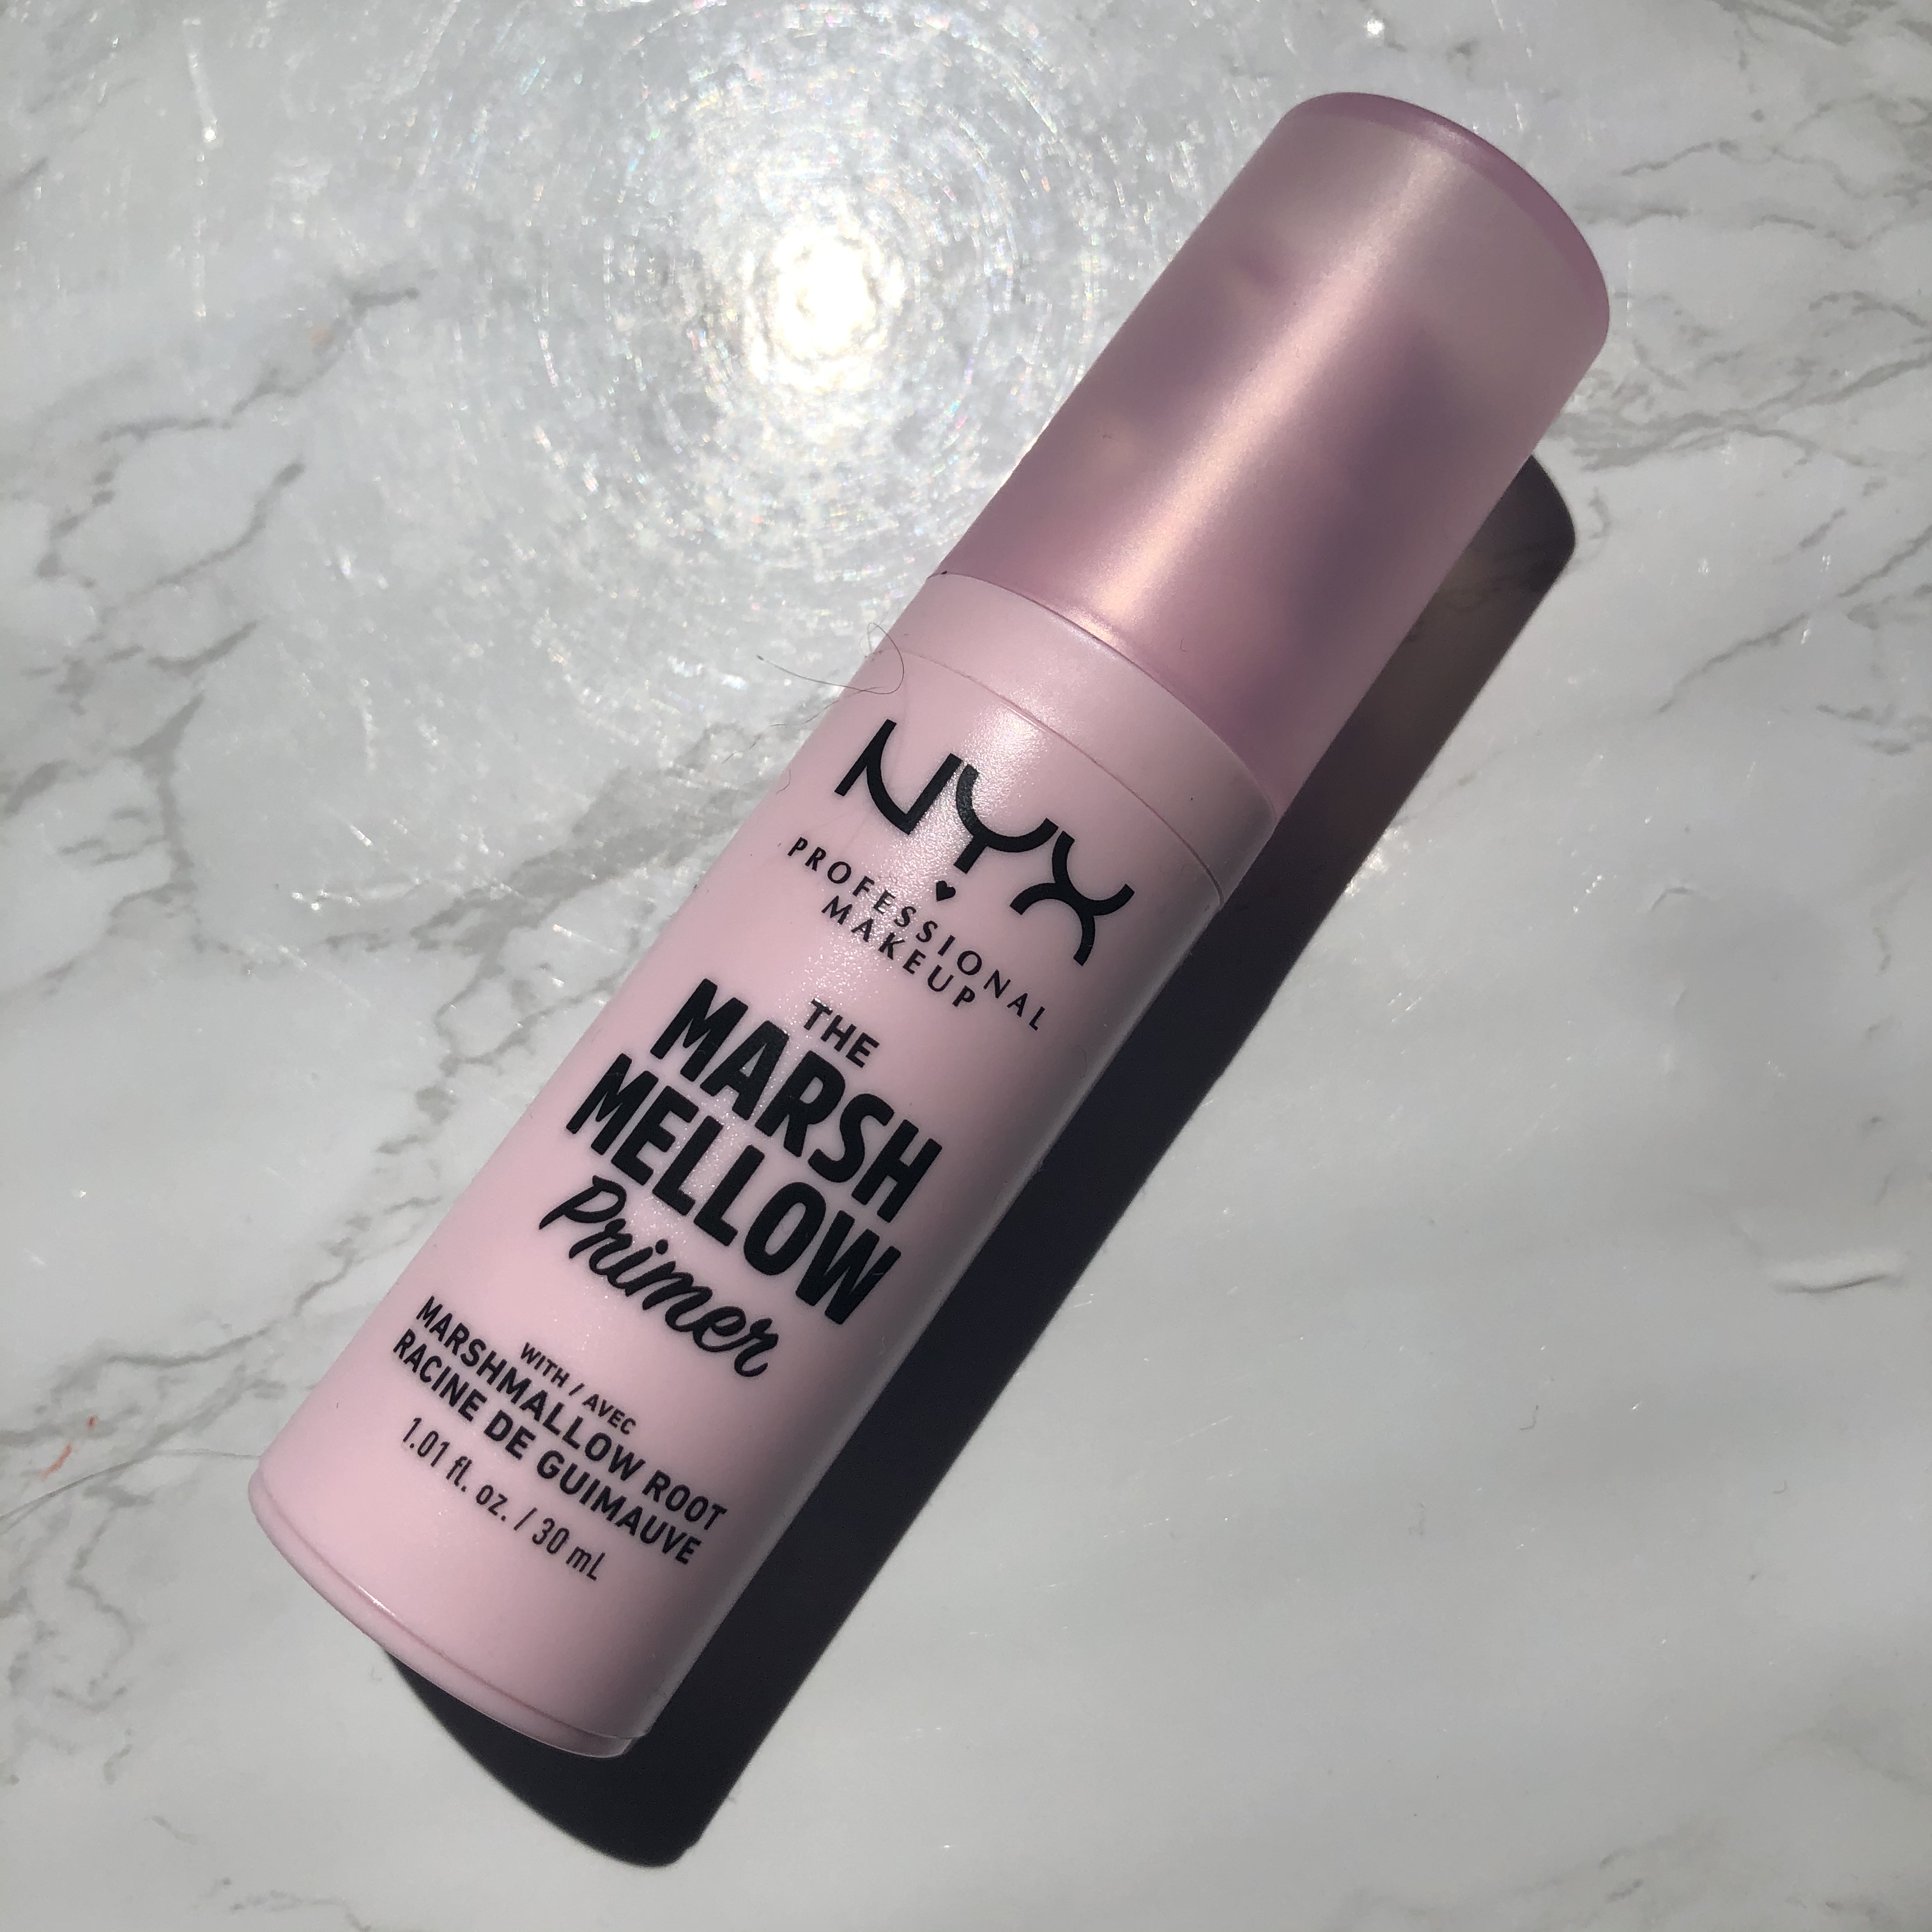 Leave it – to Review The NYX Primer Lea Marshmellow